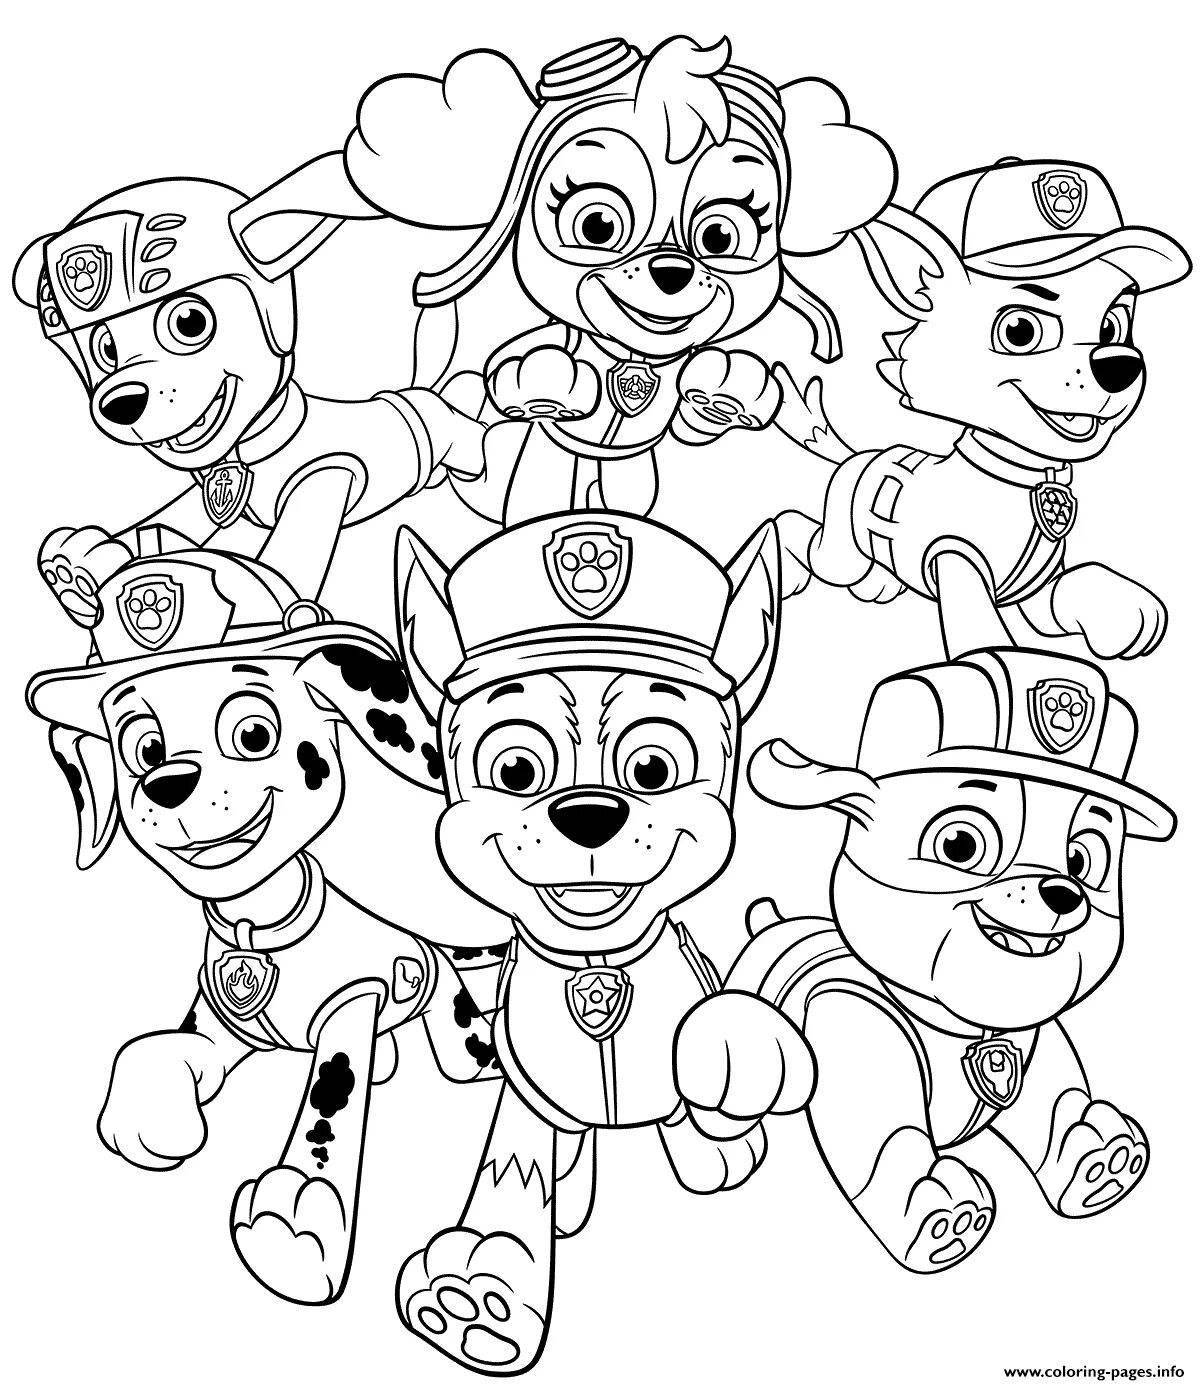 Colorful paw patrol coloring book with bright outline